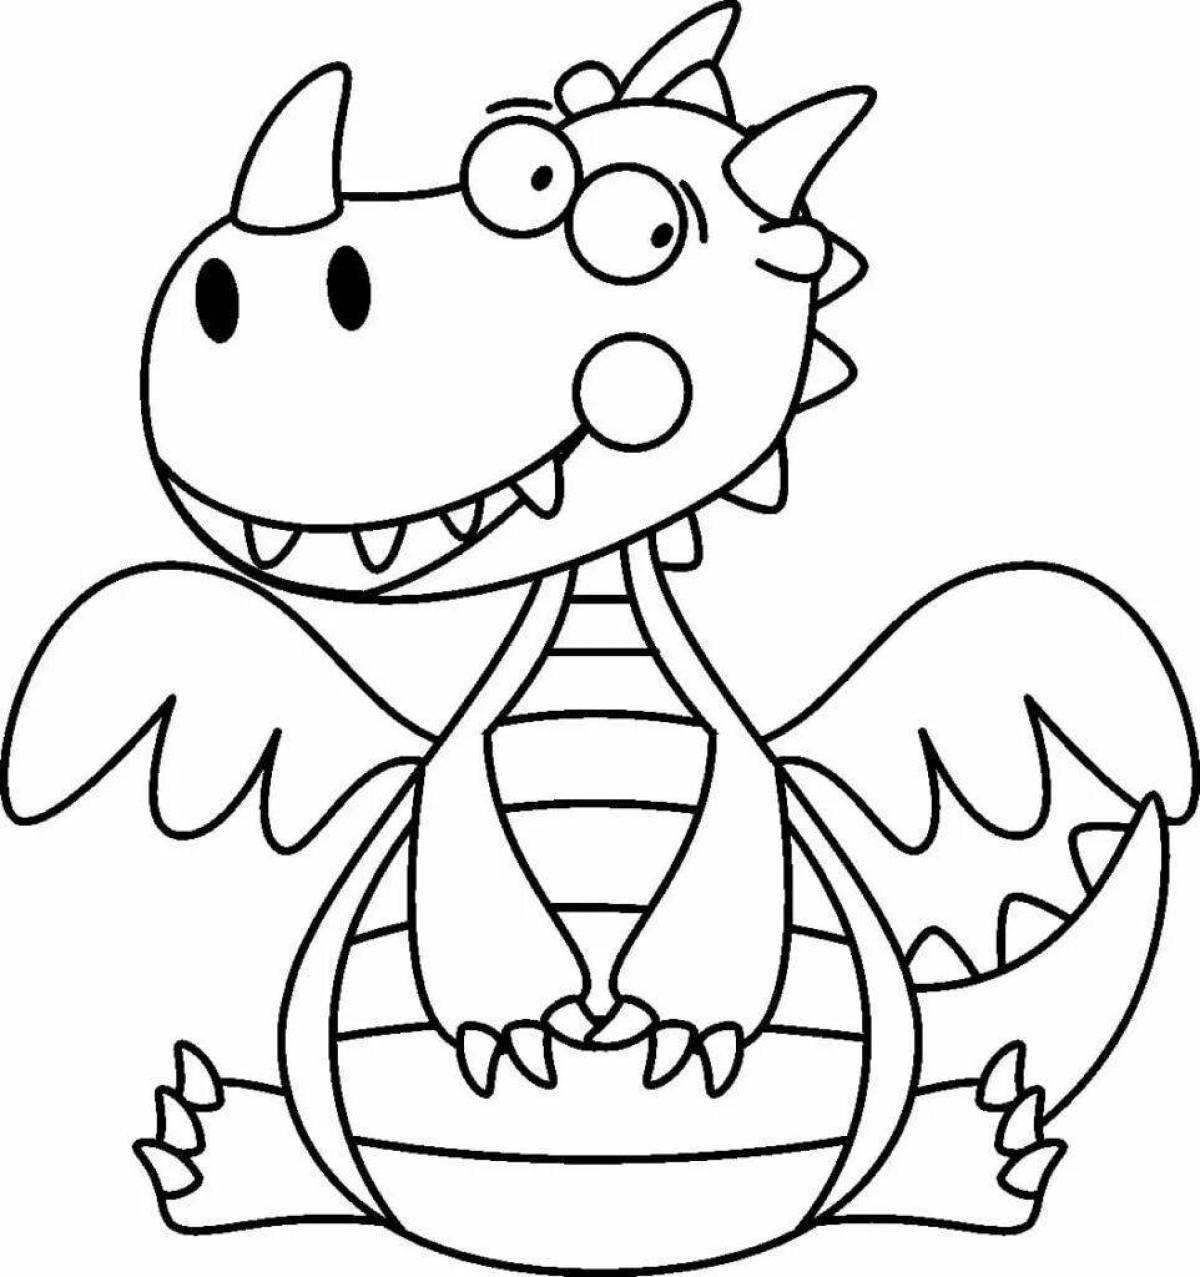 Coloring pages for kids for kids #9